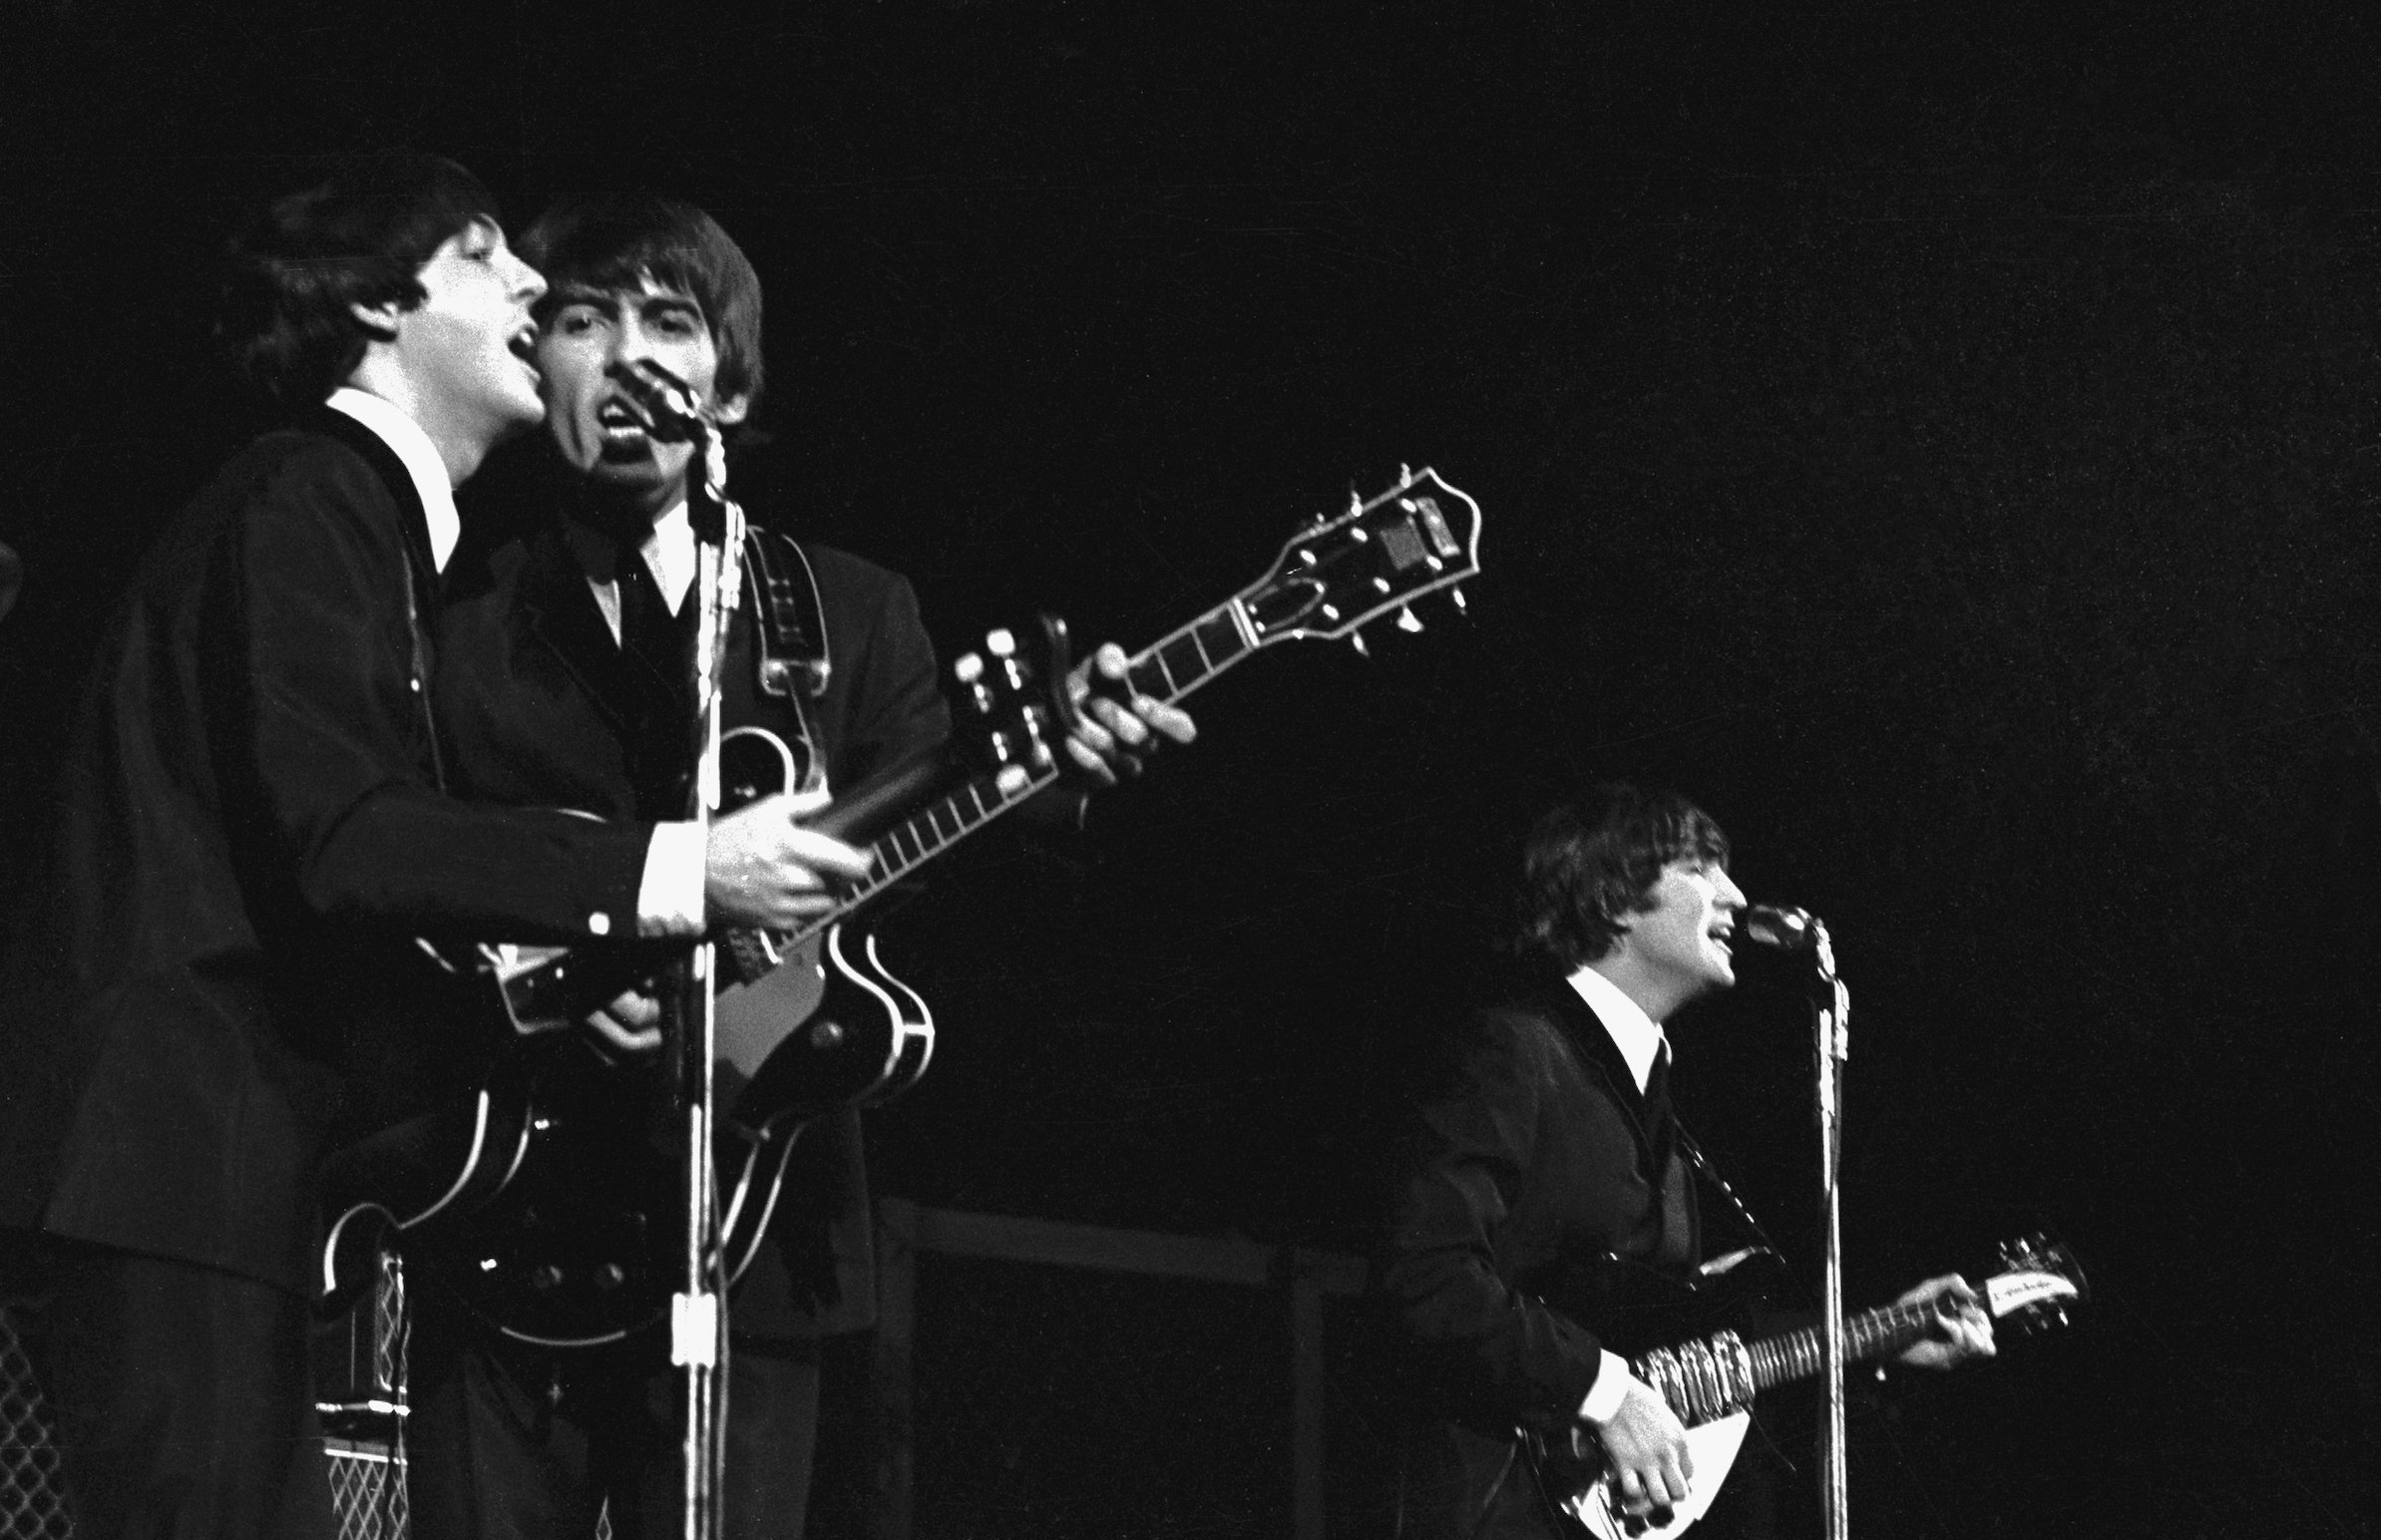 George Harrison Once Explained Why The Beatles Stopped Touring, ‘We Were Getting No Pleasure Out of It’